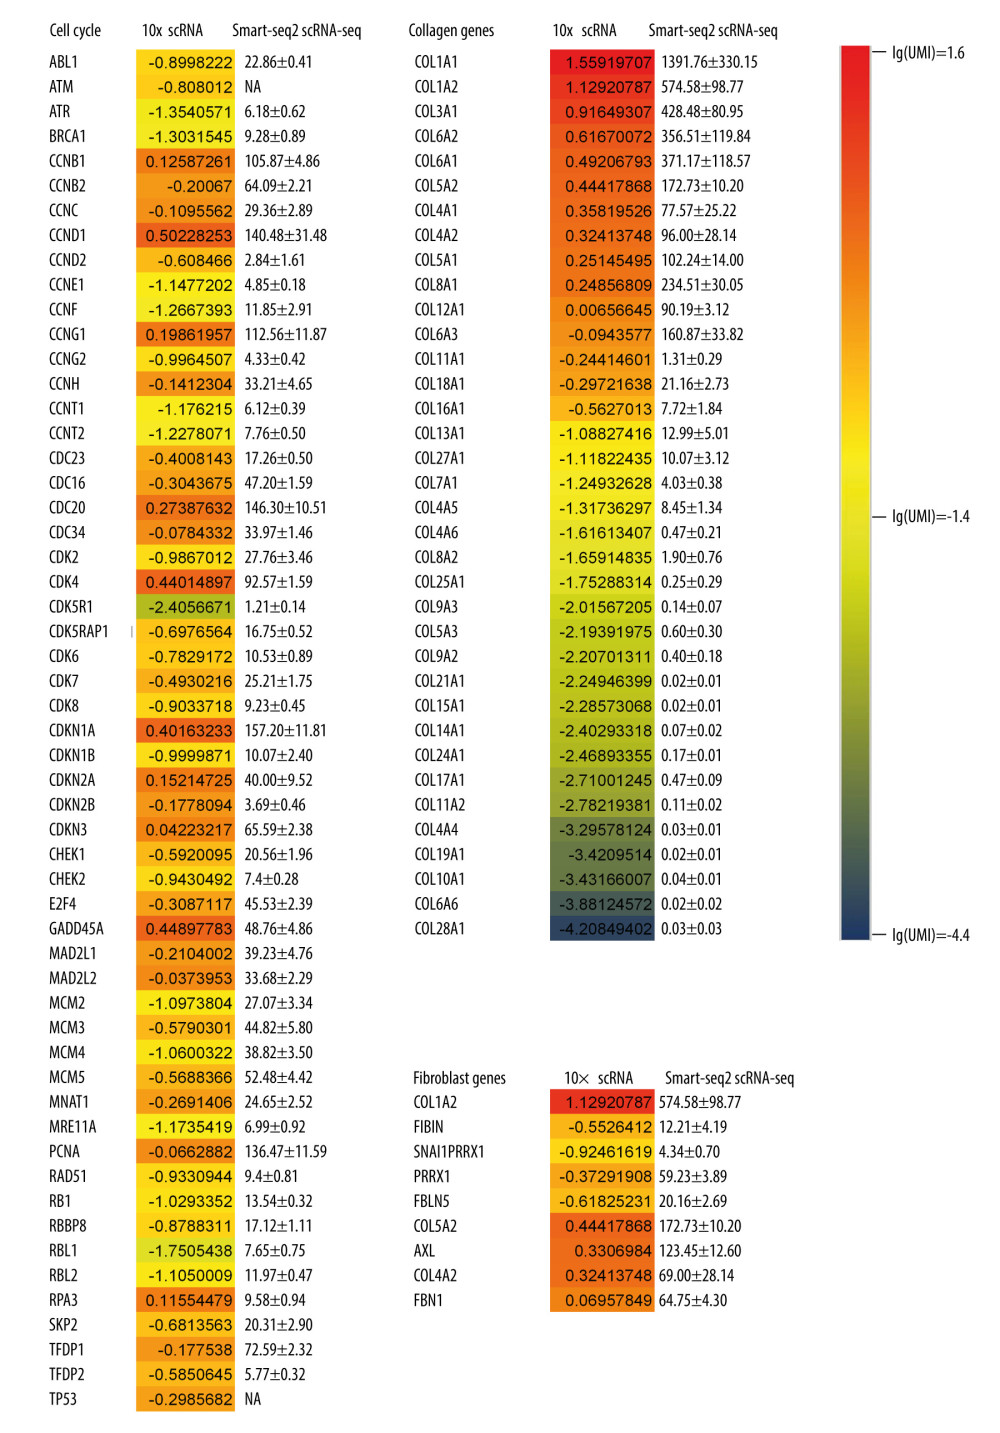 Gene expression of mesenchymal stem cells related to cell proliferation and collagen secretion. The data in the columns with color were from the 10x single-cell RNA sequencing (scRNA-seq) according to the unique molecular identifier (UMI) counting formulated by log10 for standardization. The Smart-seq2 scRNA-seq analysis results quantifying the gene expression are shown as mean±standard deviation. The 10x scRNA-seq survey matched the Smart-seq2 scRNA-seq very well.